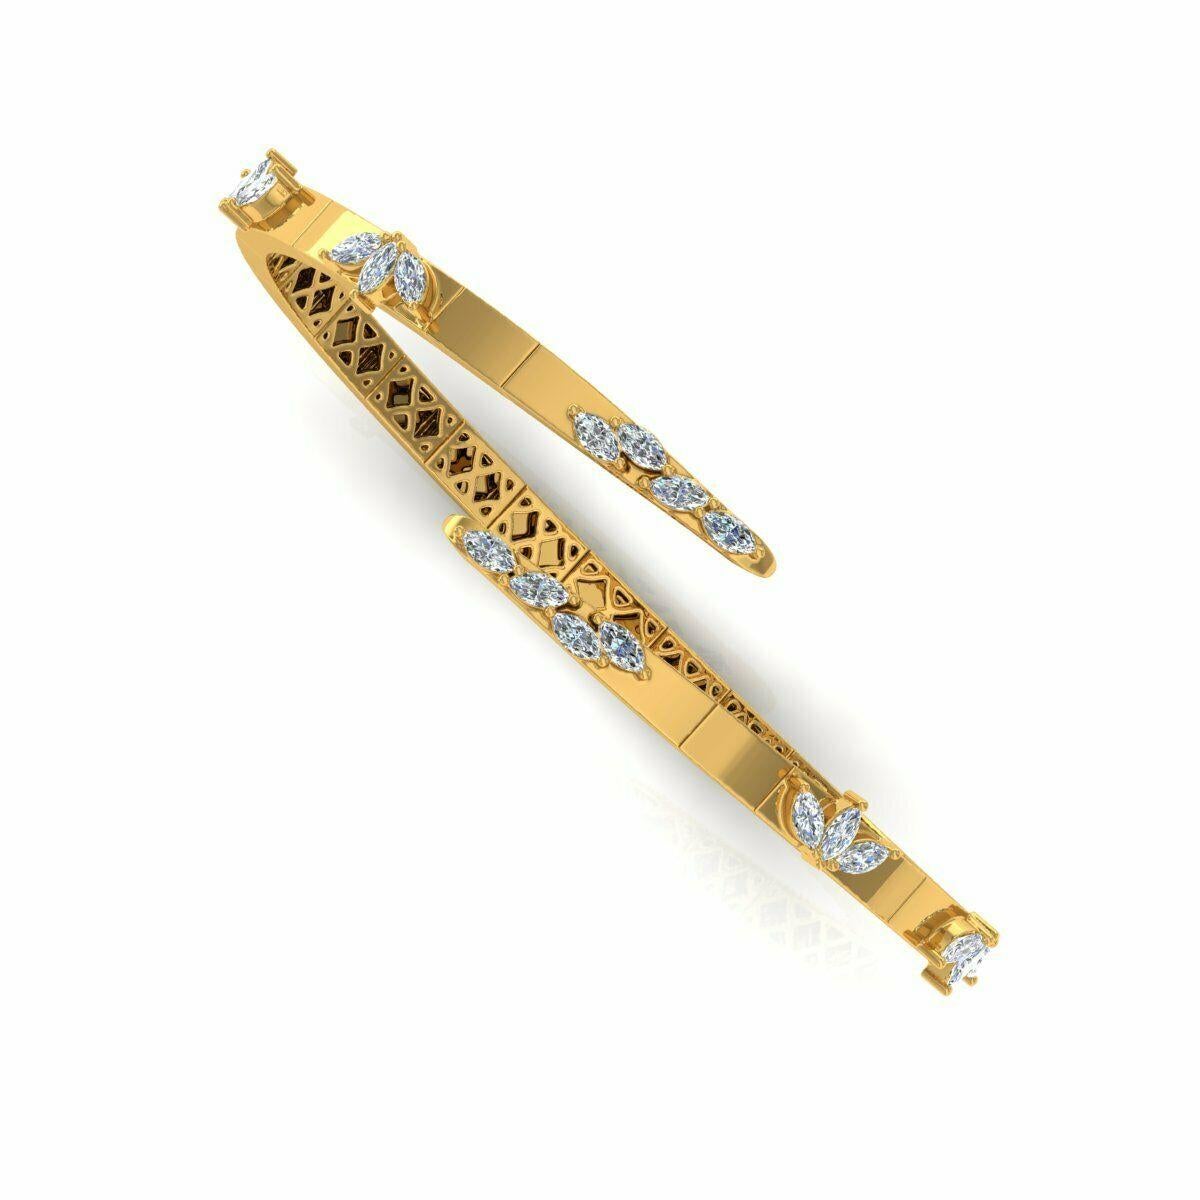 Cast from 14-karat yellow gold, this bracelet is hand set with 1.50 carats of sparkling diamonds. Available in yellow, rose and white gold. Stack with your favorite pieces or wear it alone.

FOLLOW MEGHNA JEWELS storefront to view the latest